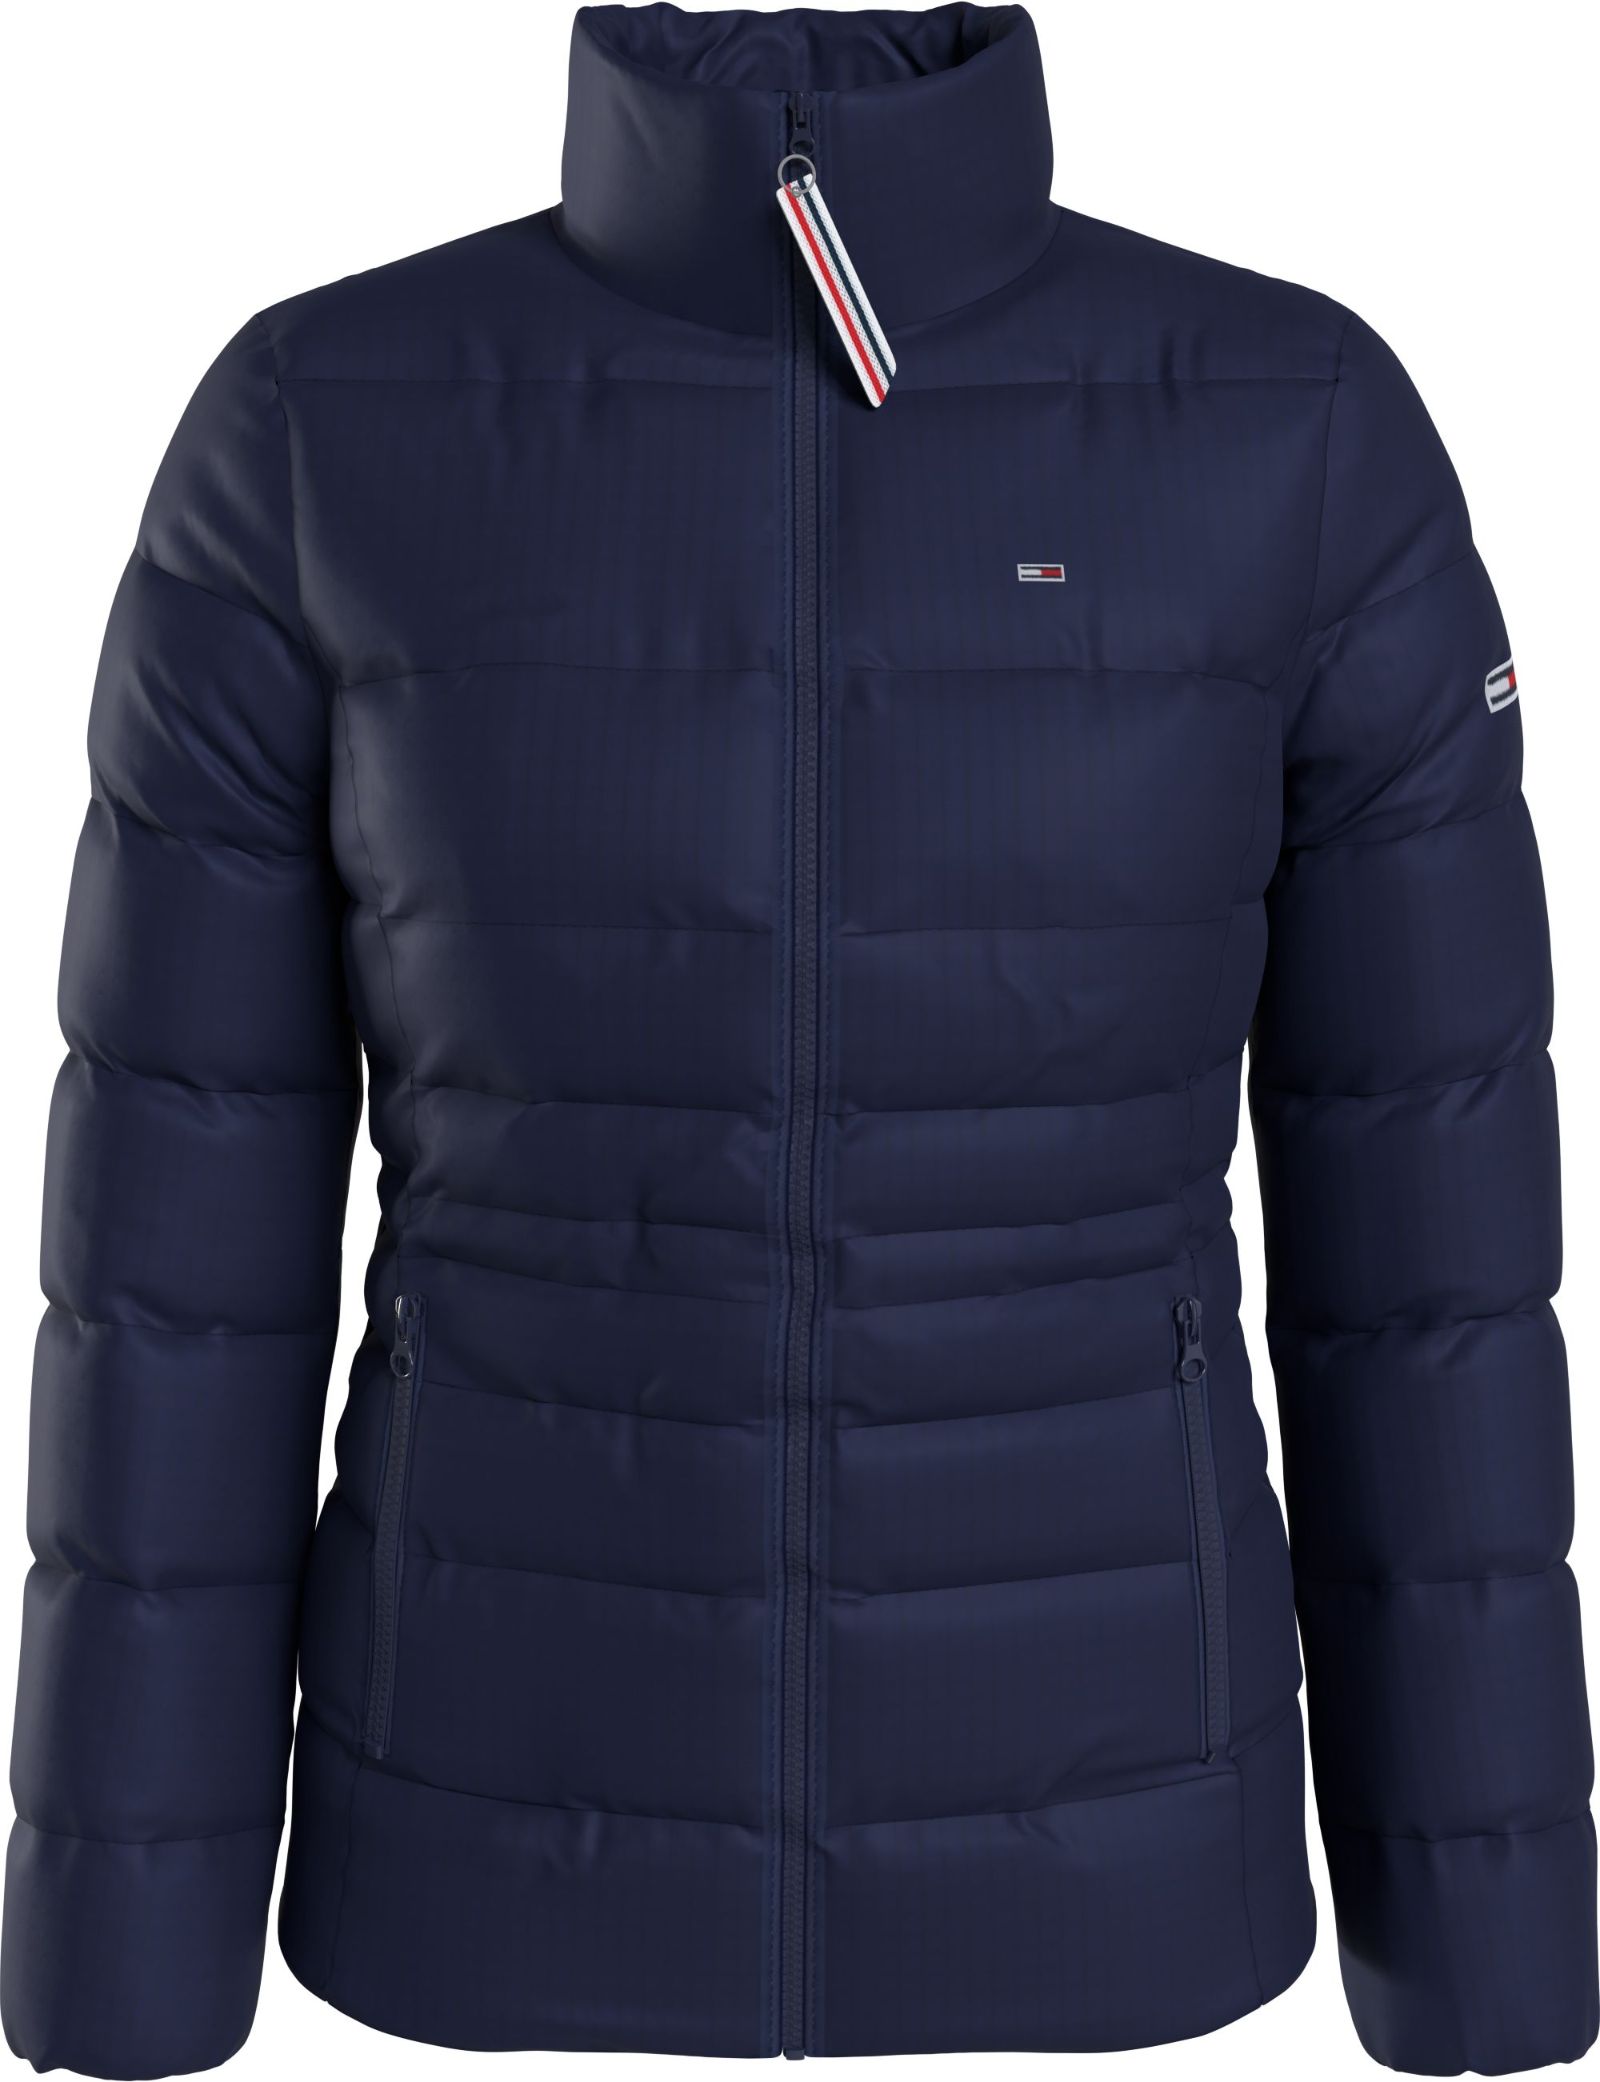 CHAQUETA  QUILTED TAPE DETAIL JACKET 100% RECYCLED NYLON / POLYAMIDE  Twilight navy - c87